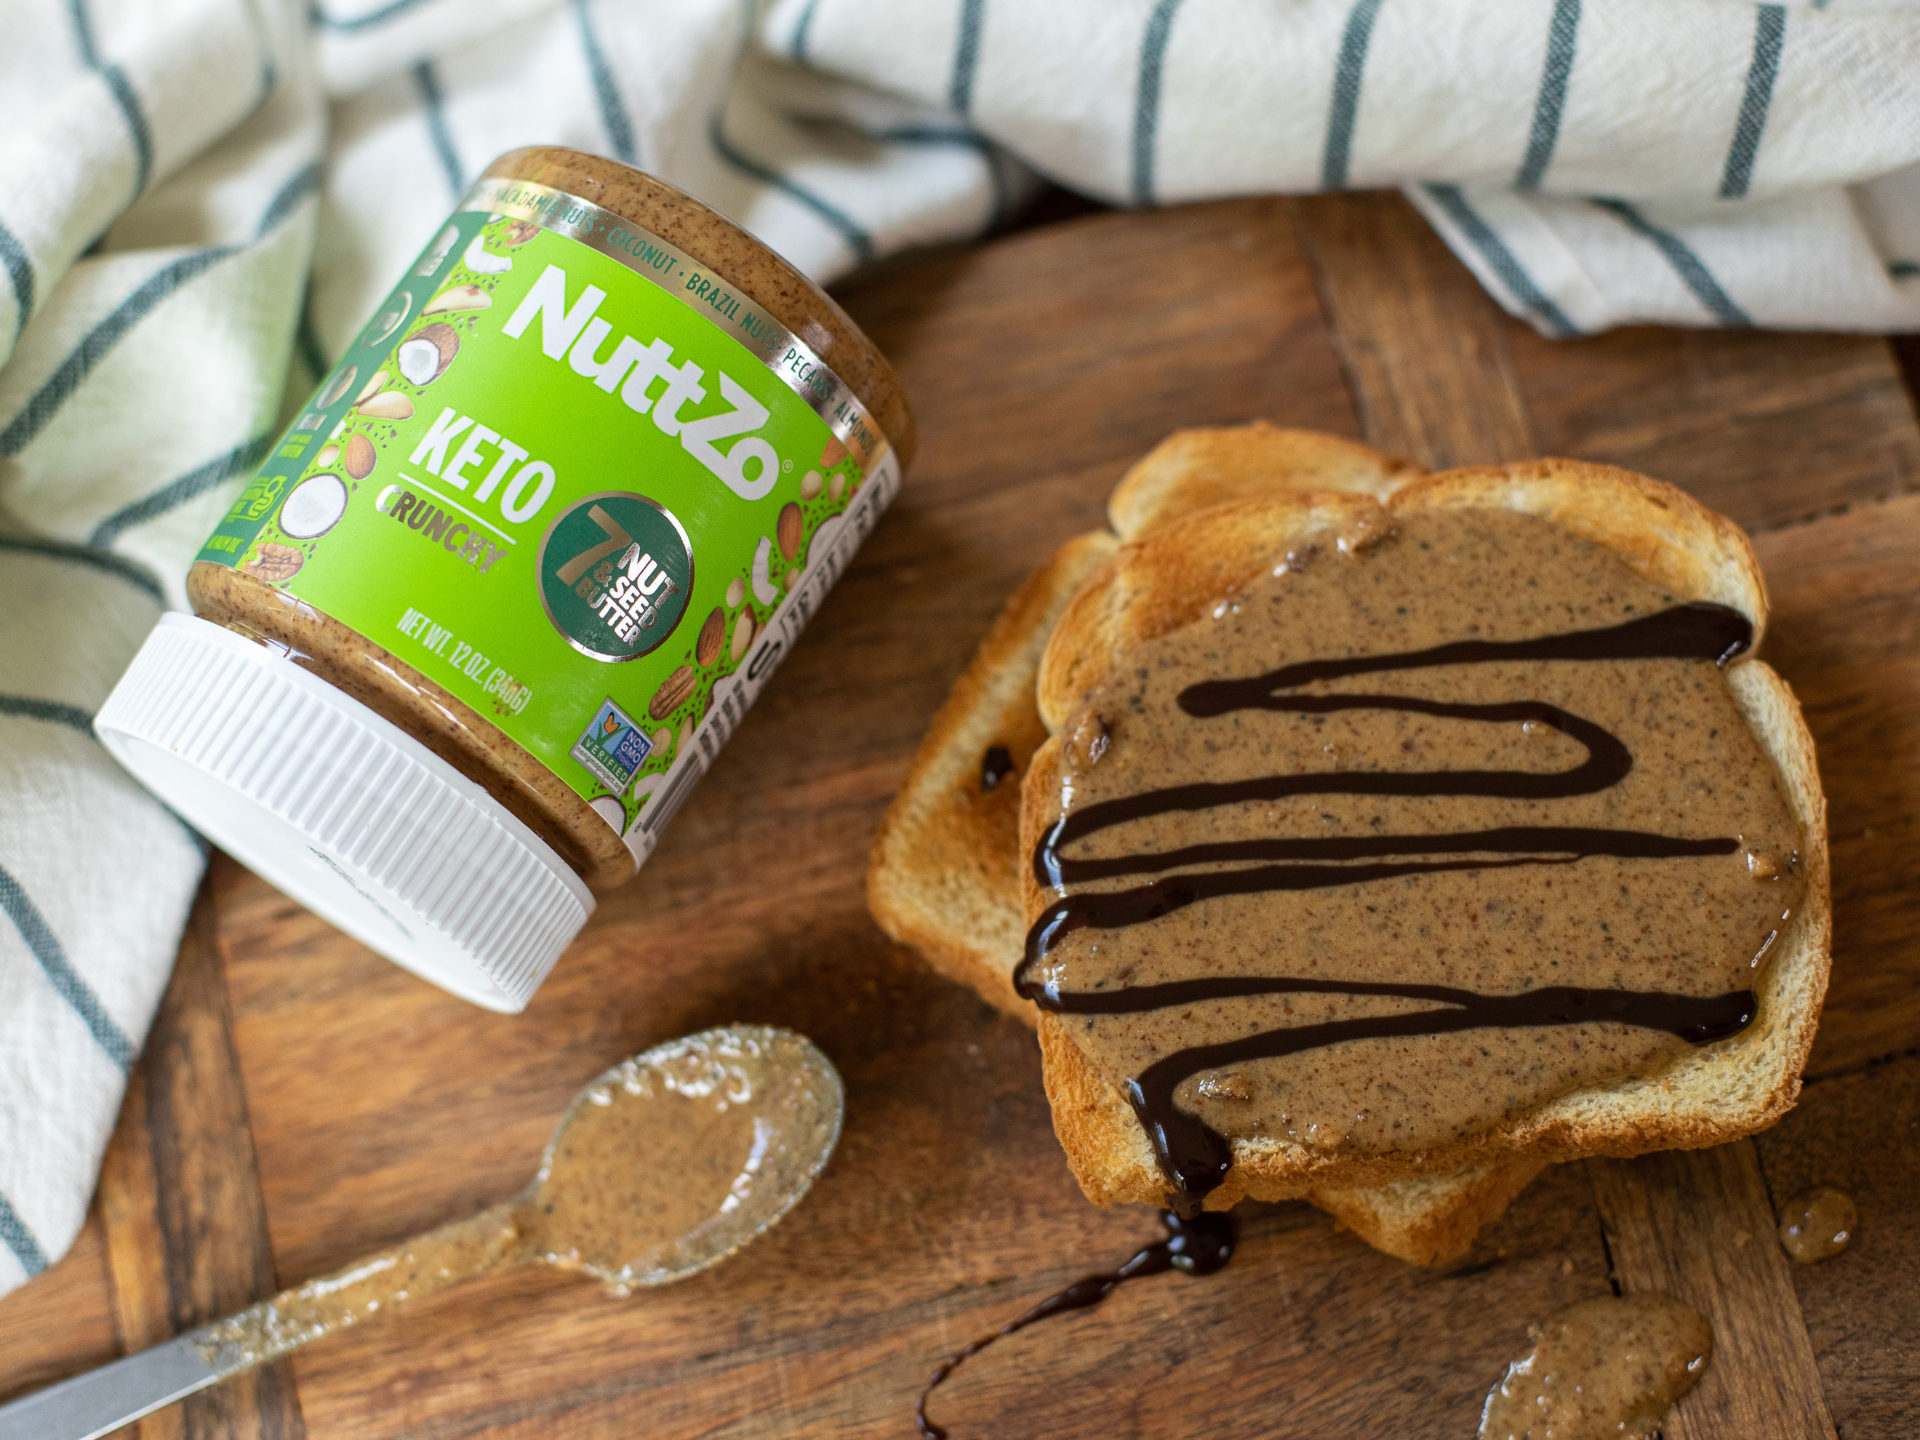 NuttZo Nut & Seed Butter As Low As $5.99 At Kroger – Half Price!